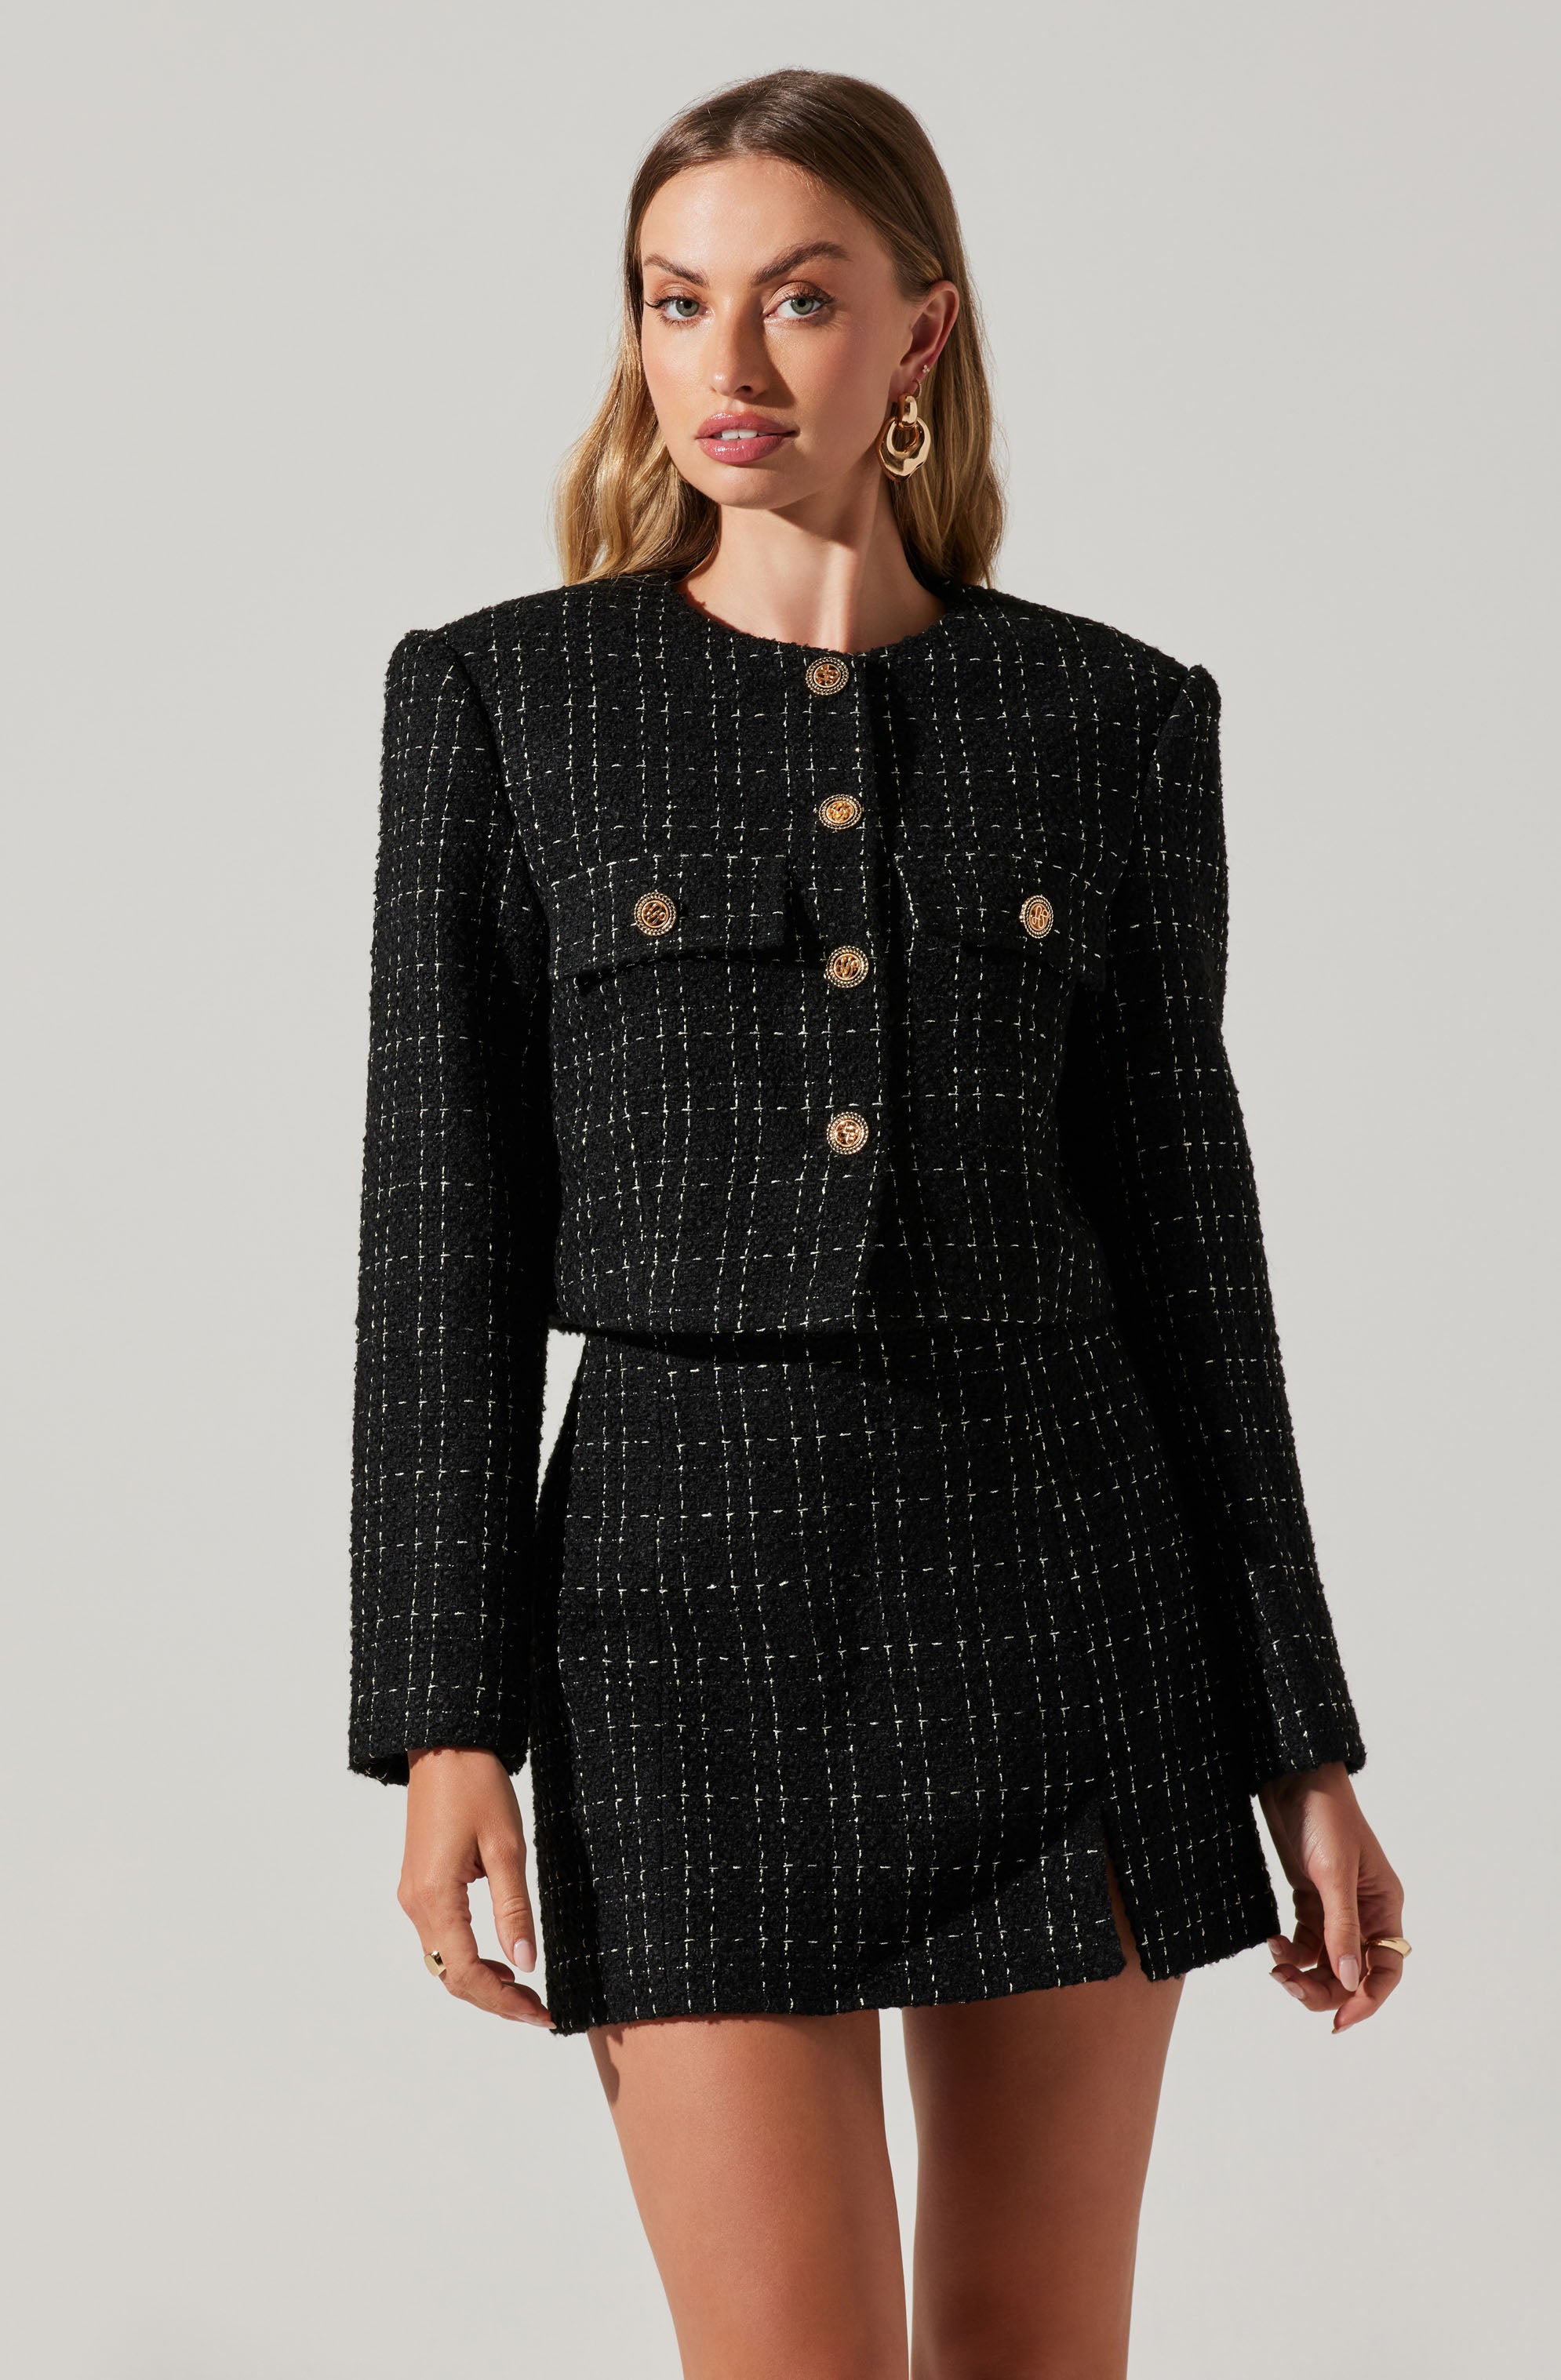 Sweetheart ASTR Fitted – The Label Rivka Blazer